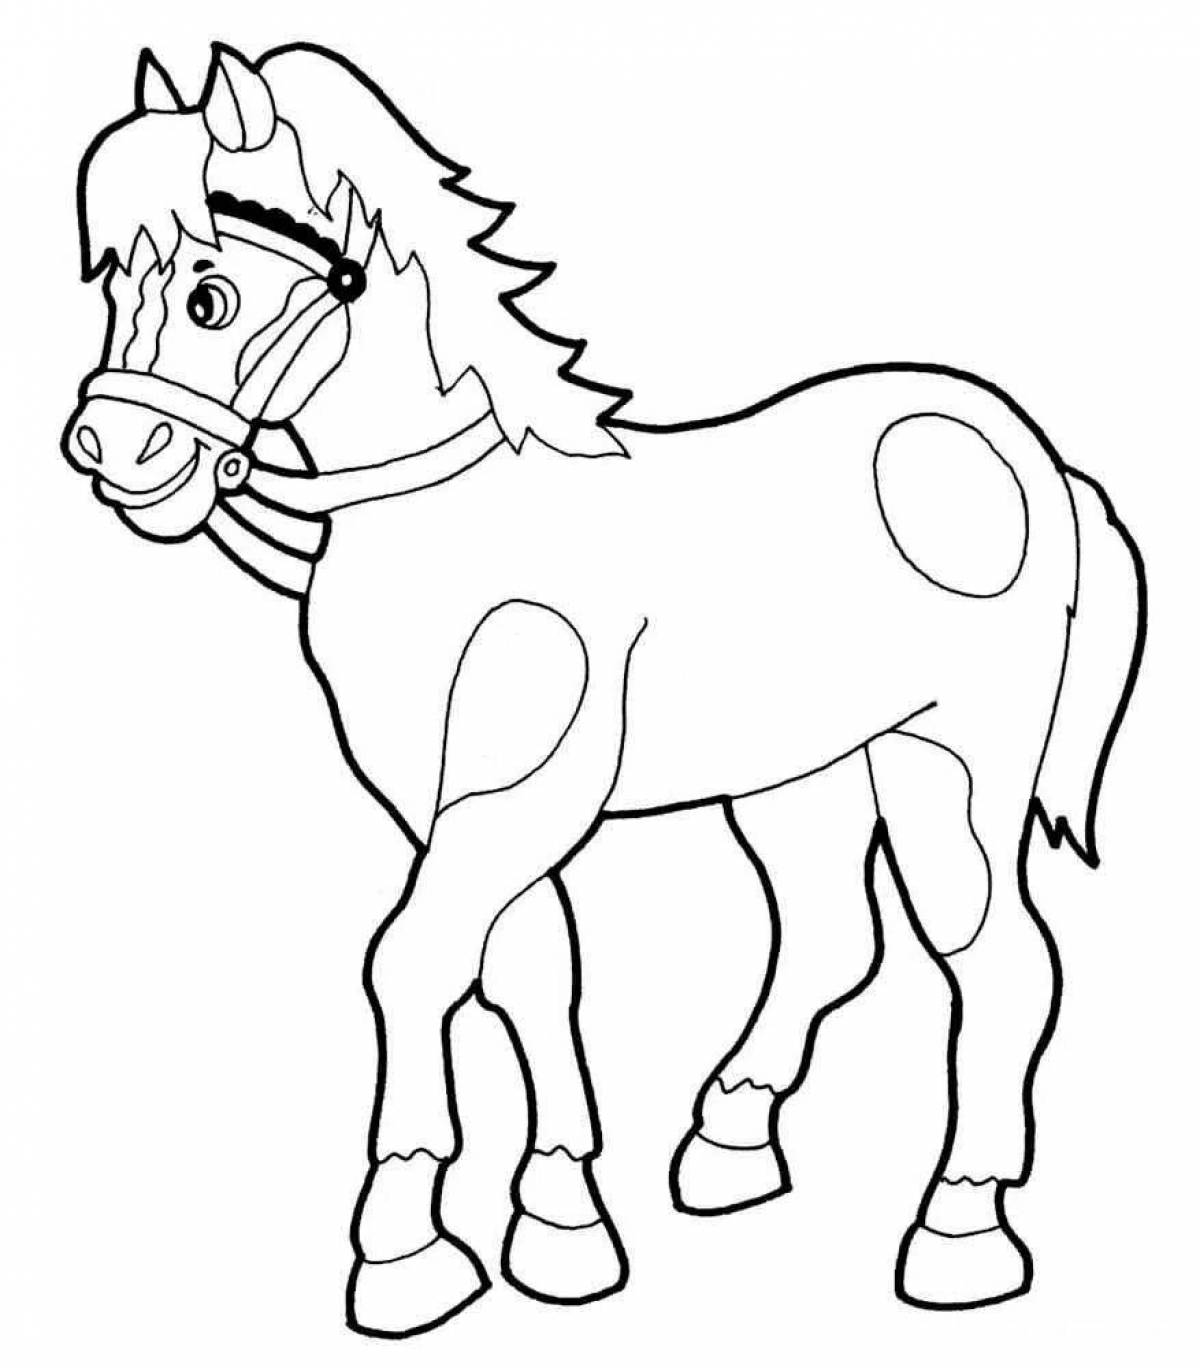 Majestic drawing of a horse for children